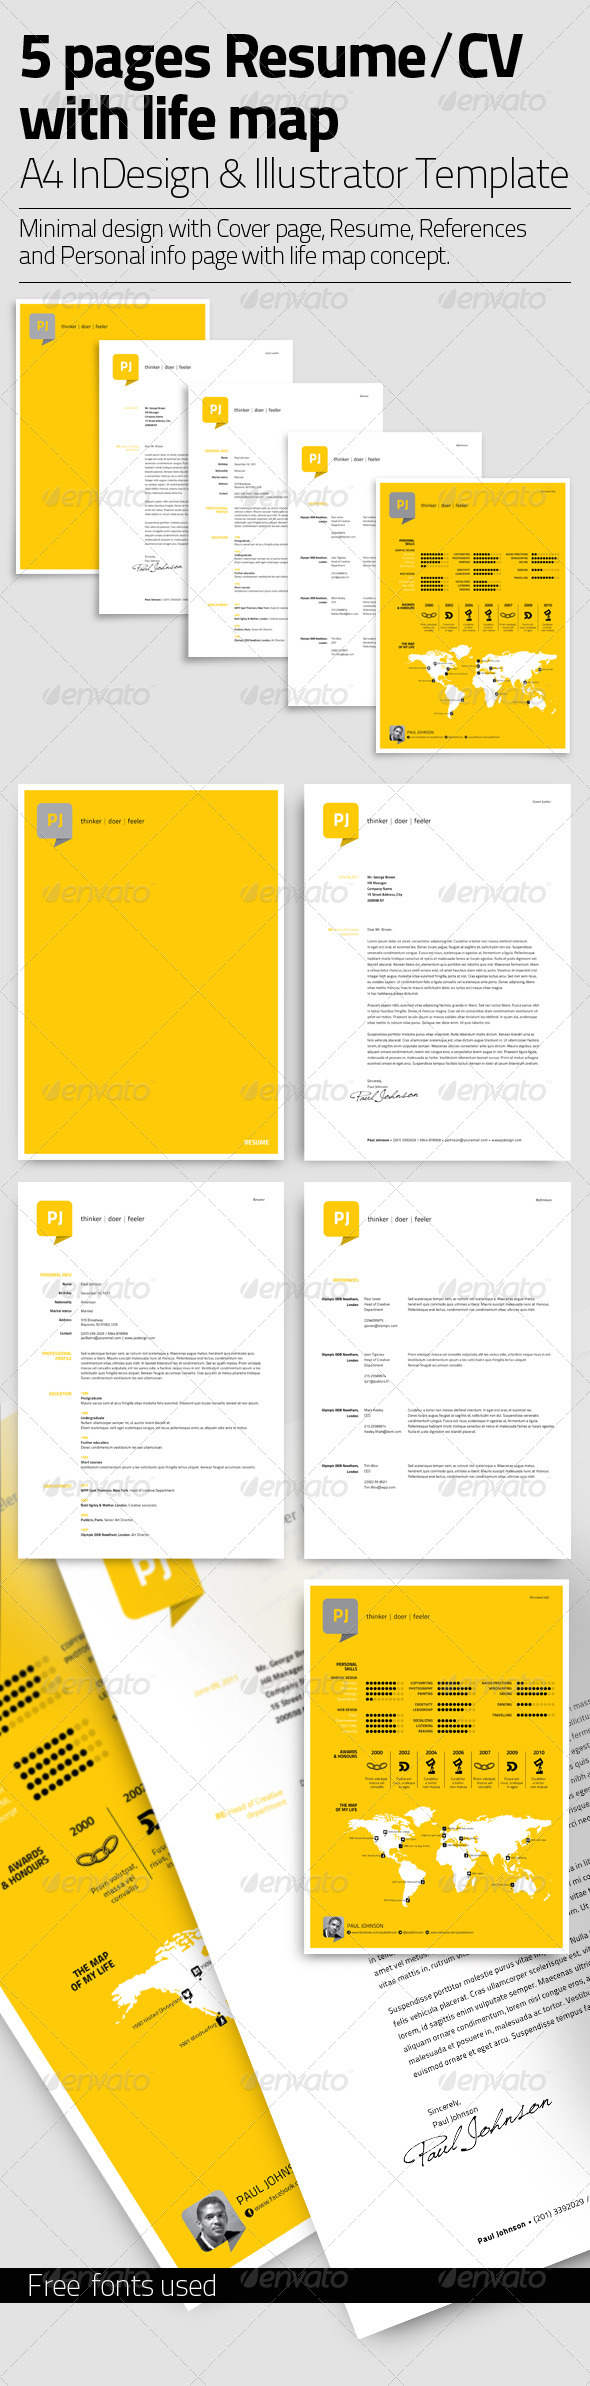 Resume Template | 5 Pages with Life Map